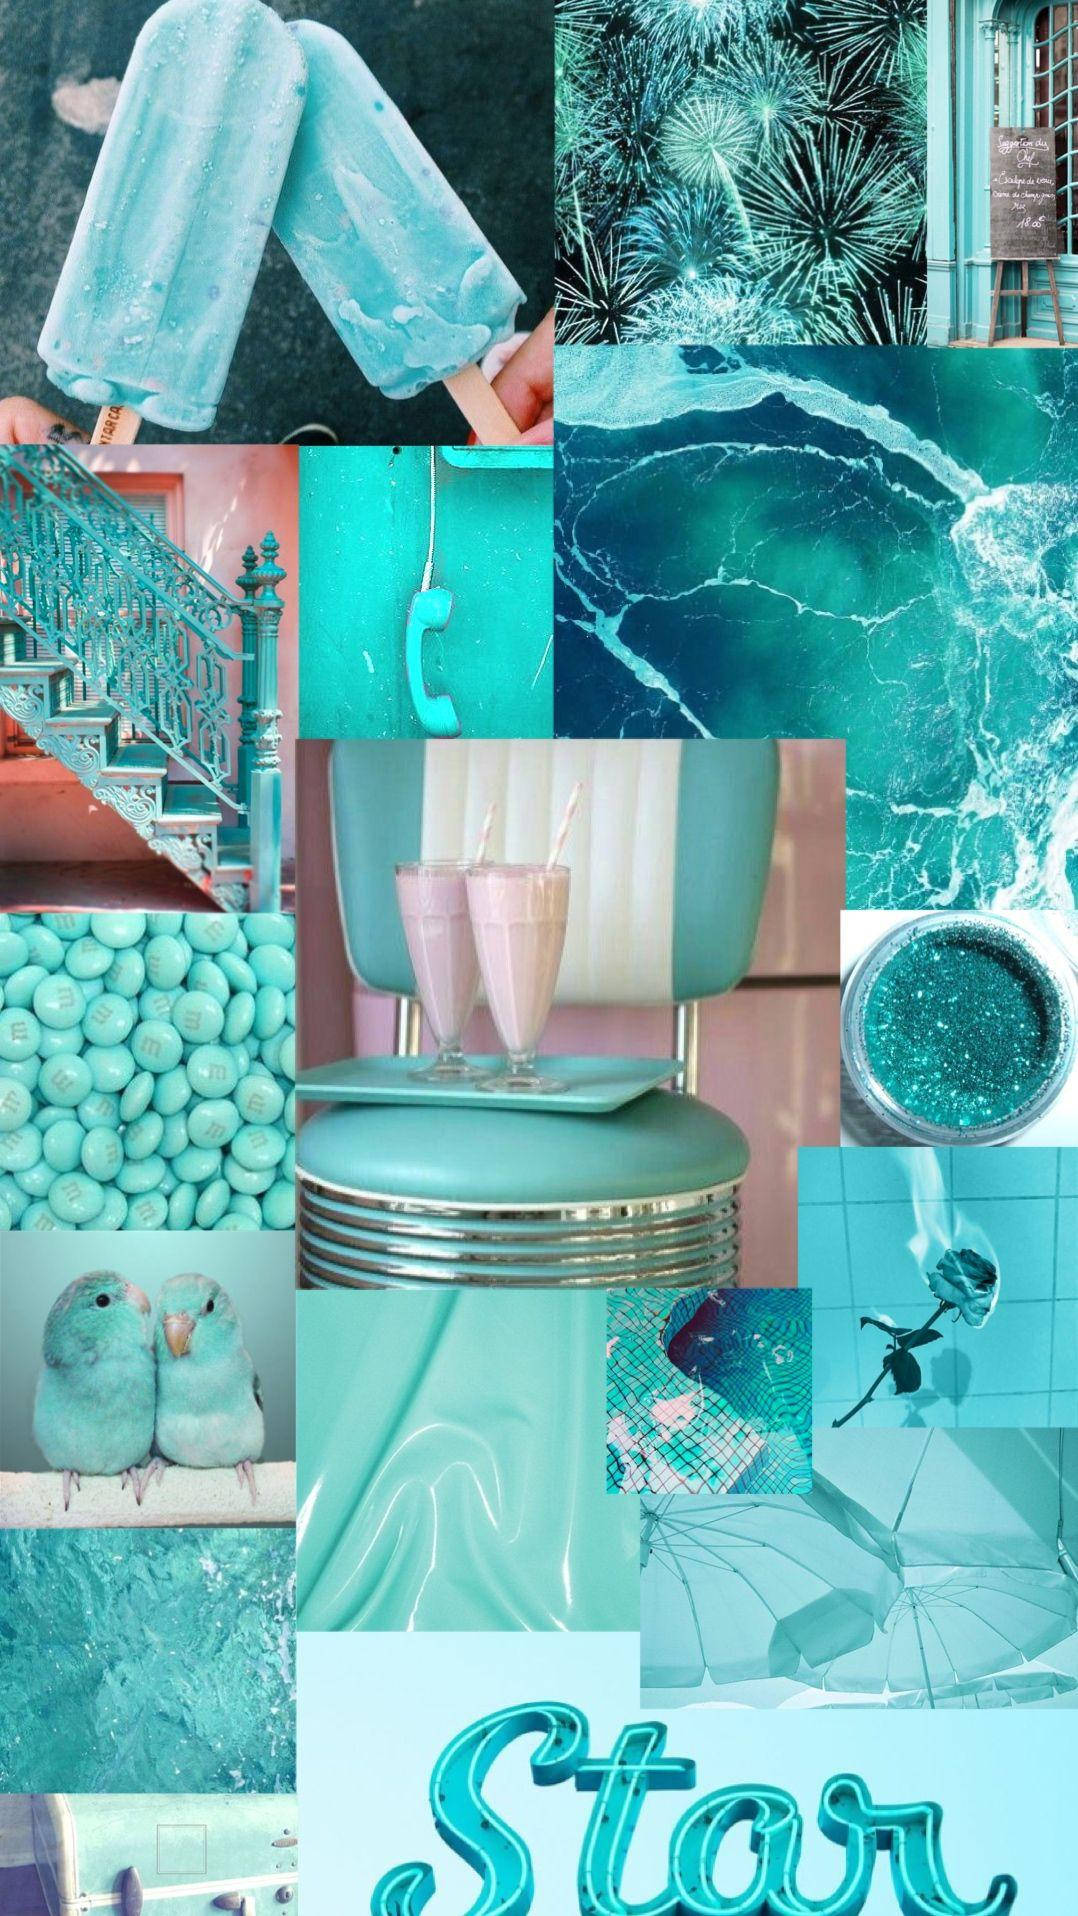 Overlapping Photomontage Aesthetic Teal Background